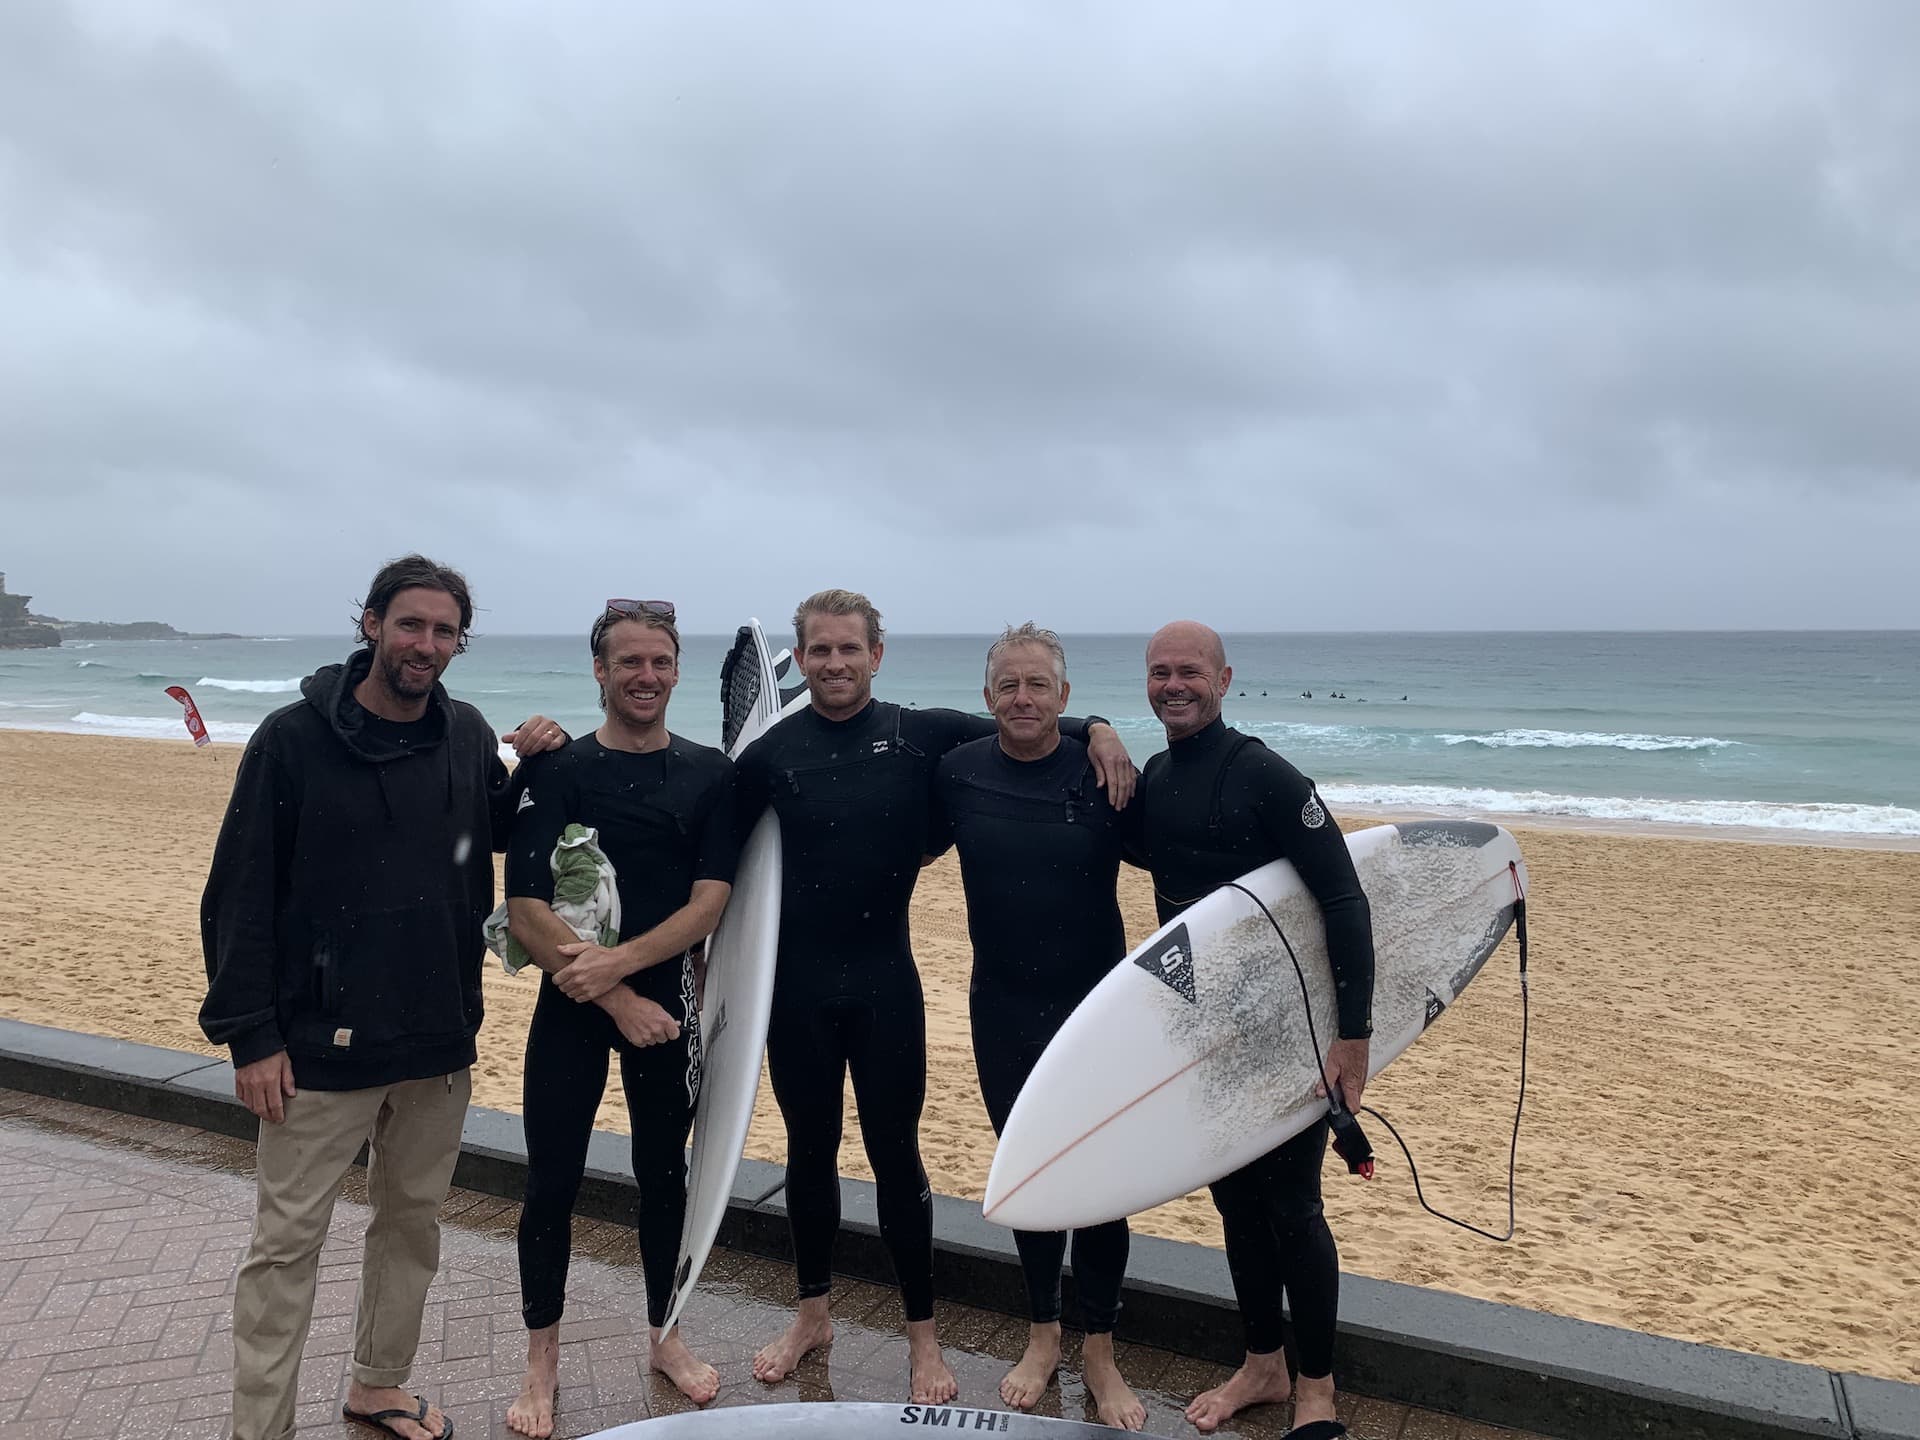 Over $10k Raised by Our Team For Surf Aid